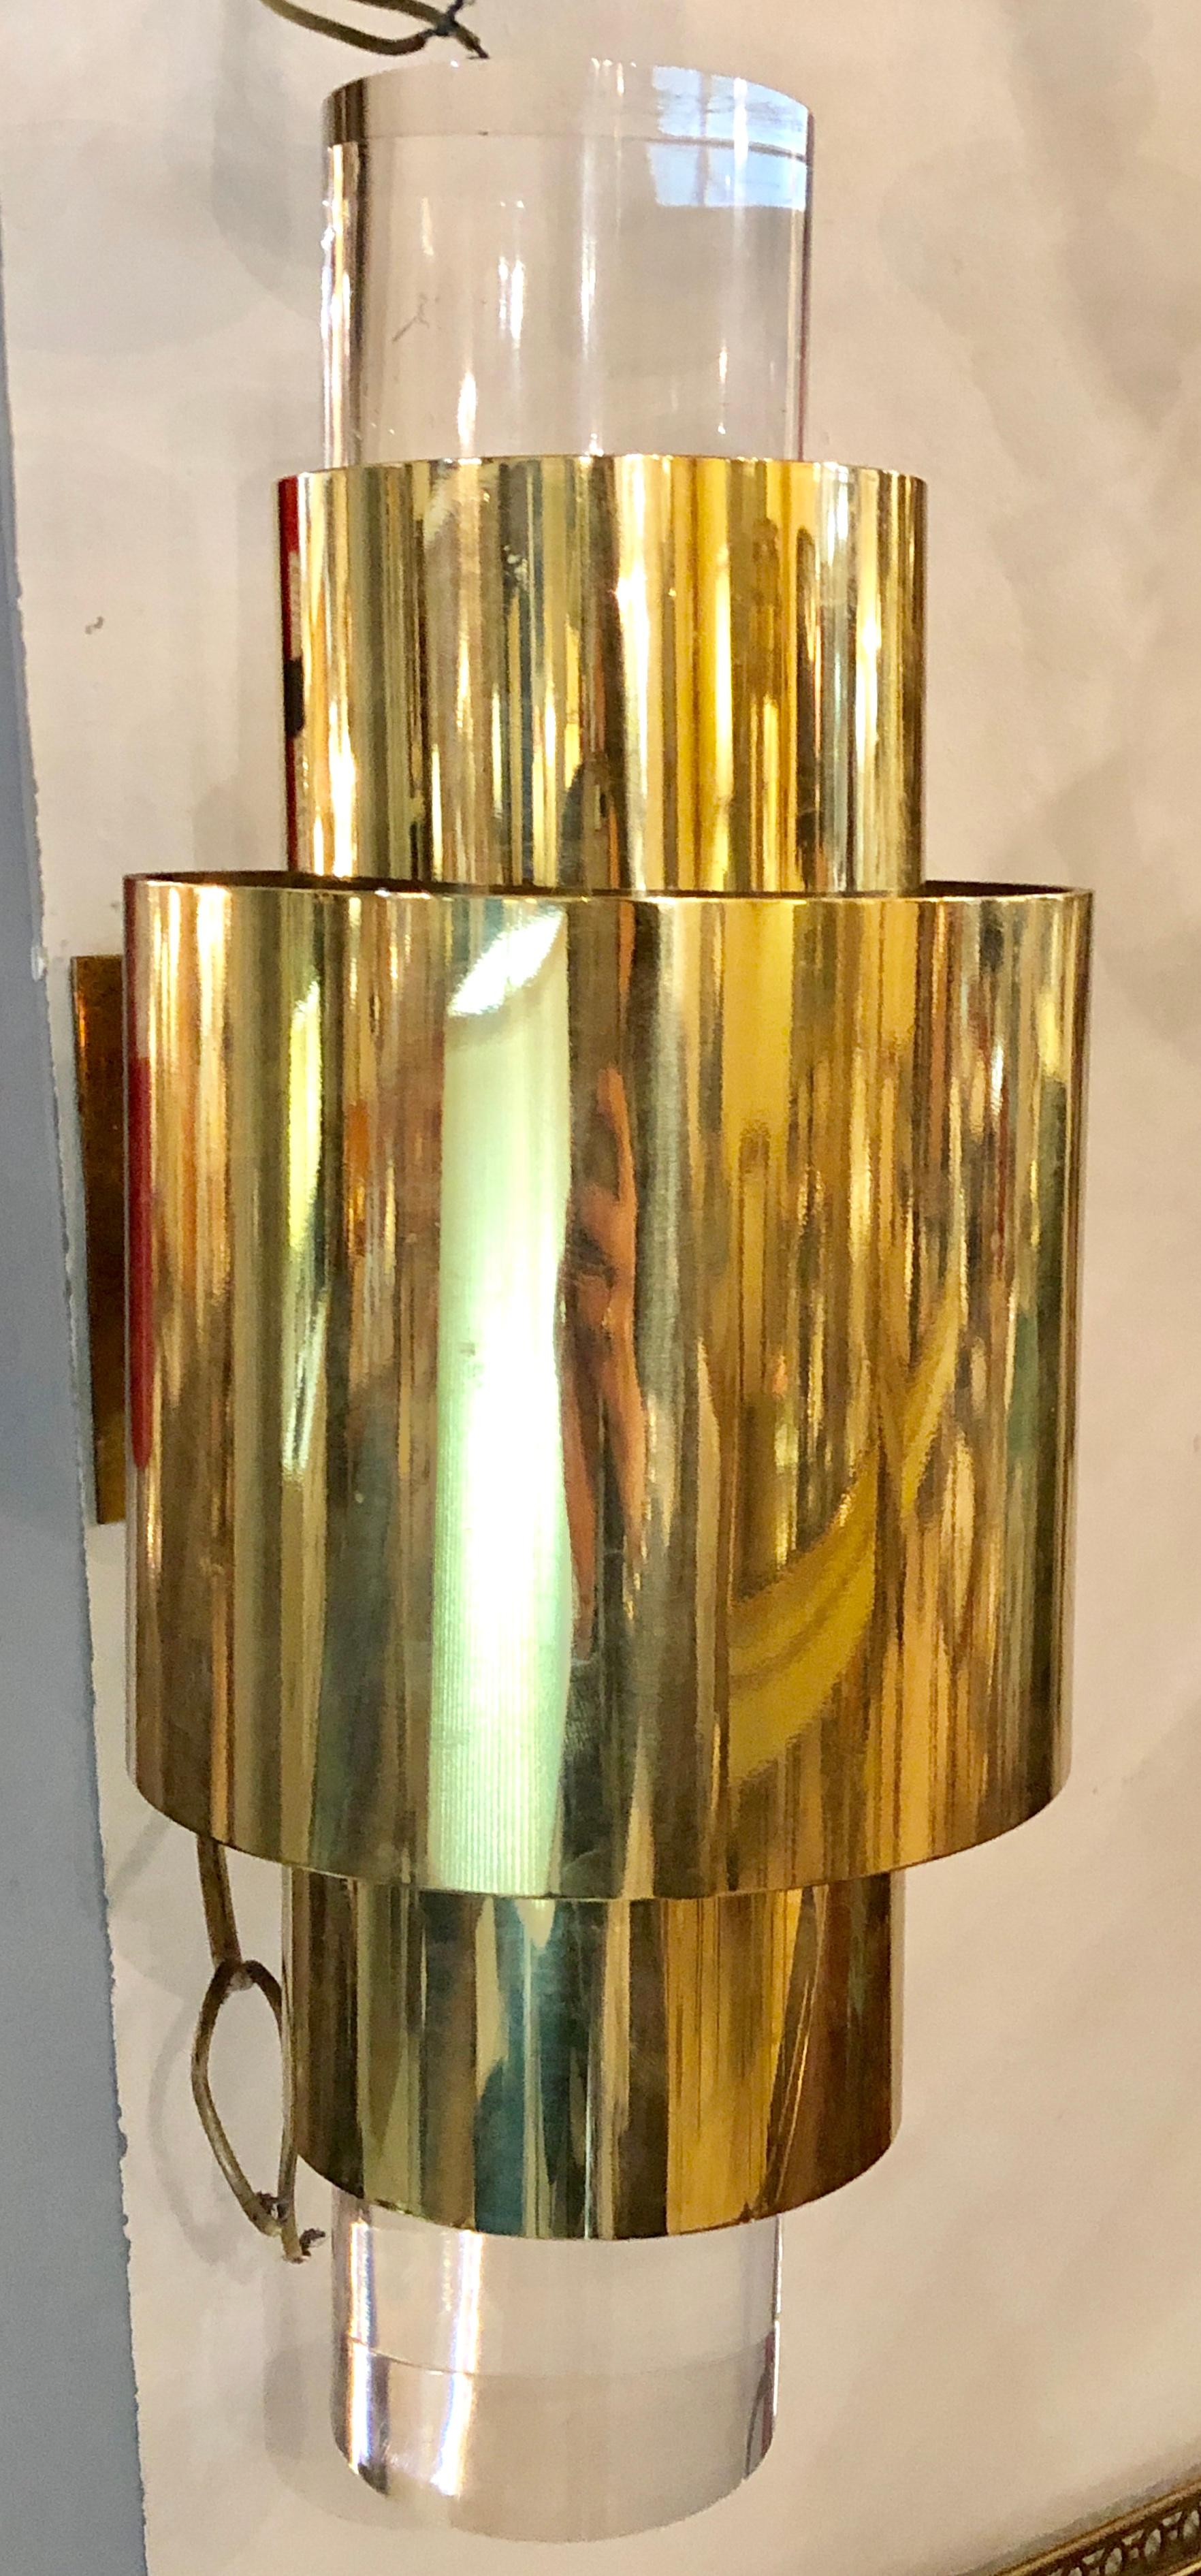 Pair of brass and Lucite wall sconces. These sleek and stylish Mid-Century Modern wall sconce of wall lights have large think Lucite tubular decorated tops and bottoms sitting inside the brass tubular frames. The pair having strong brass wall plates.